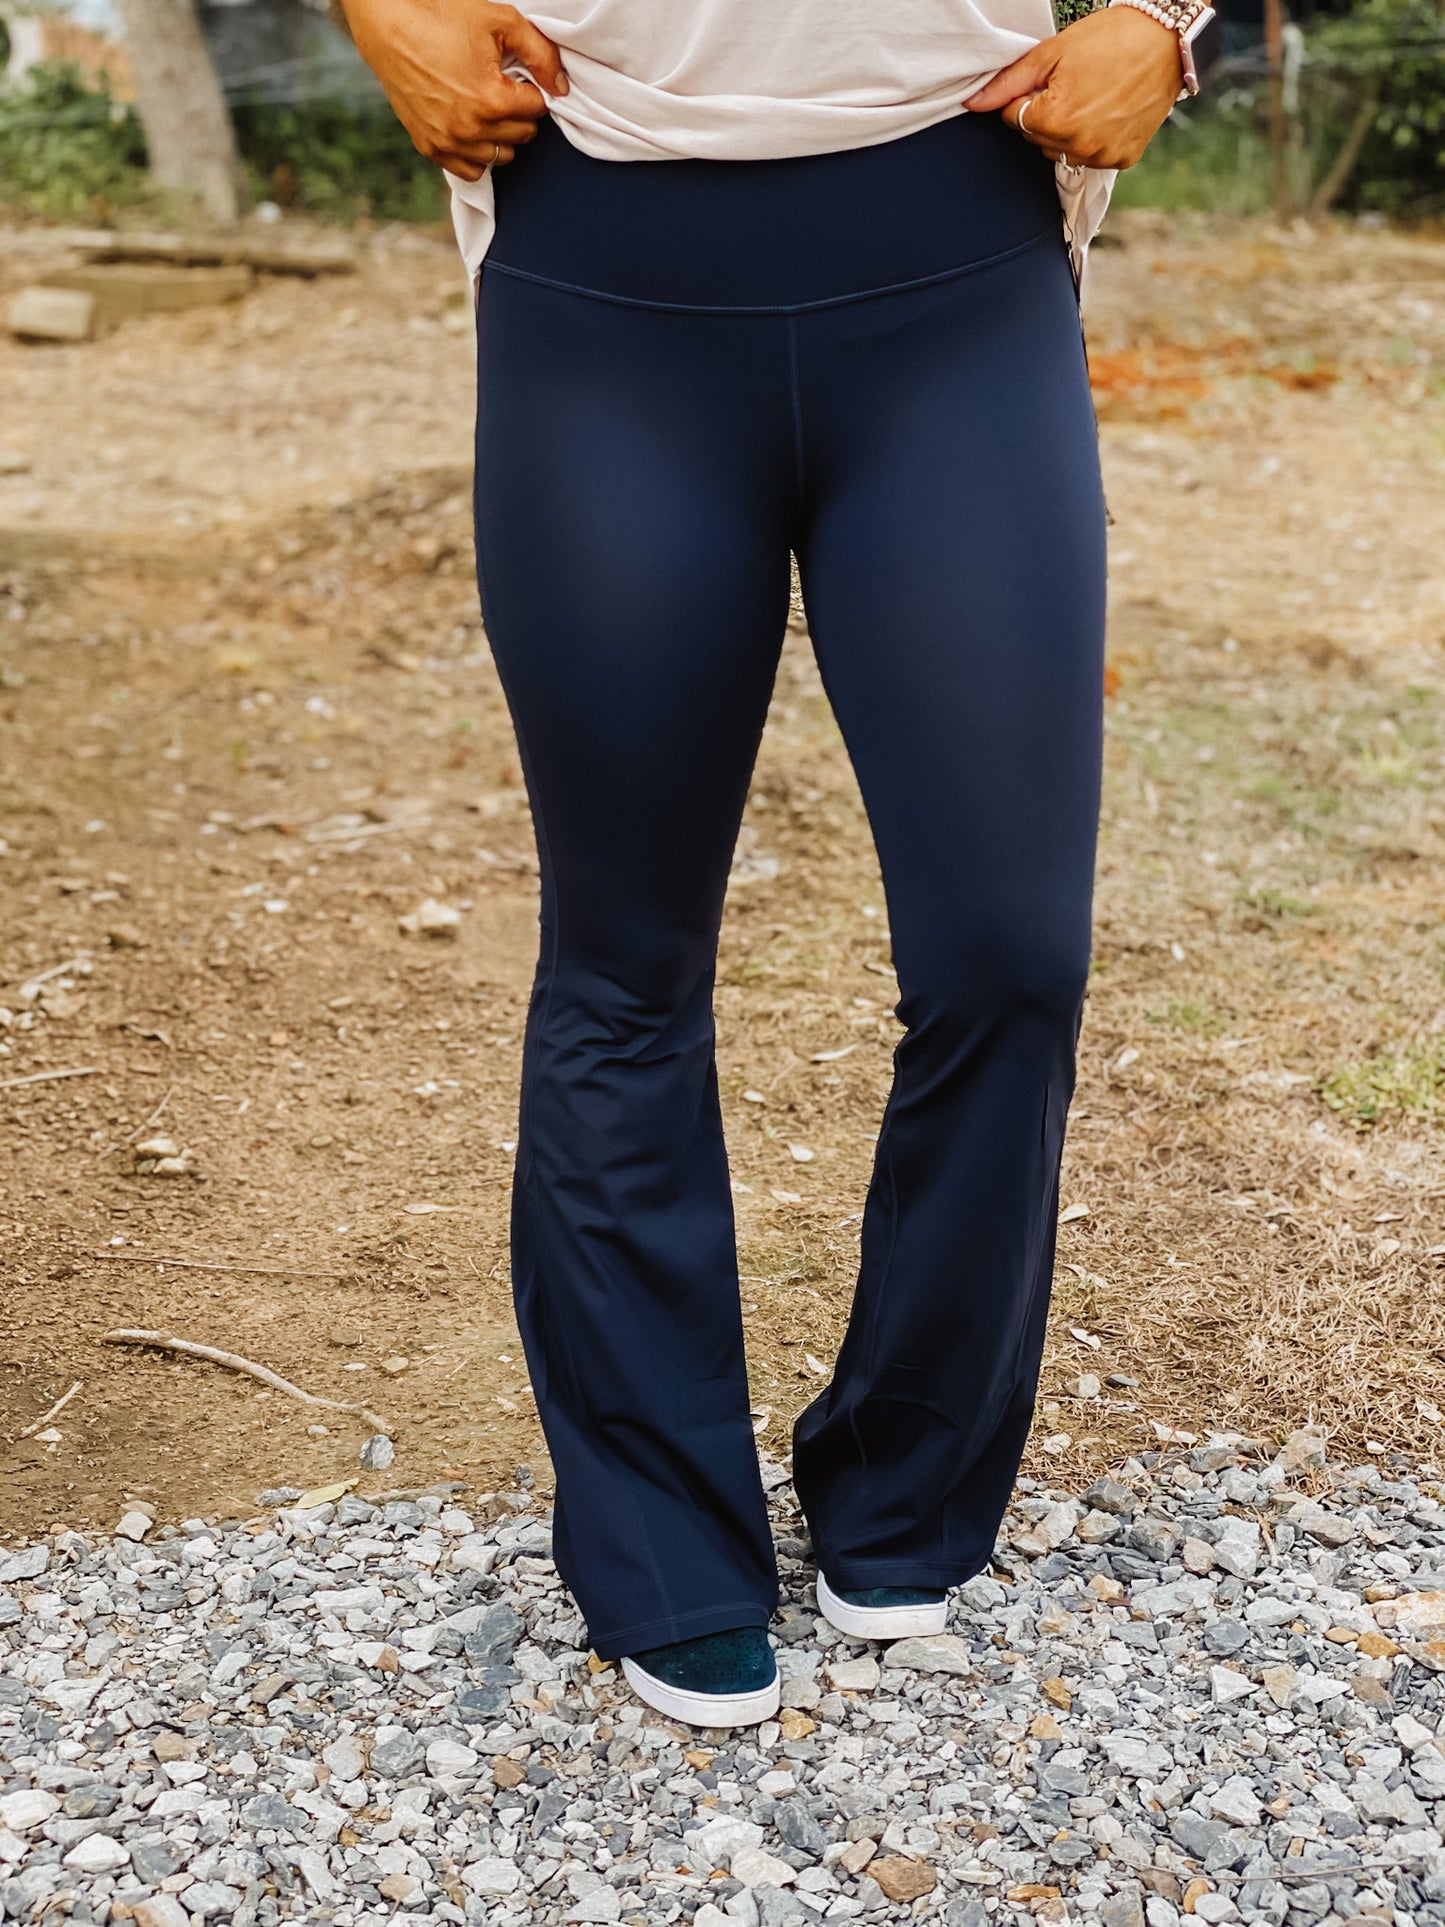 On The Go Yoga Pants- 2 colors